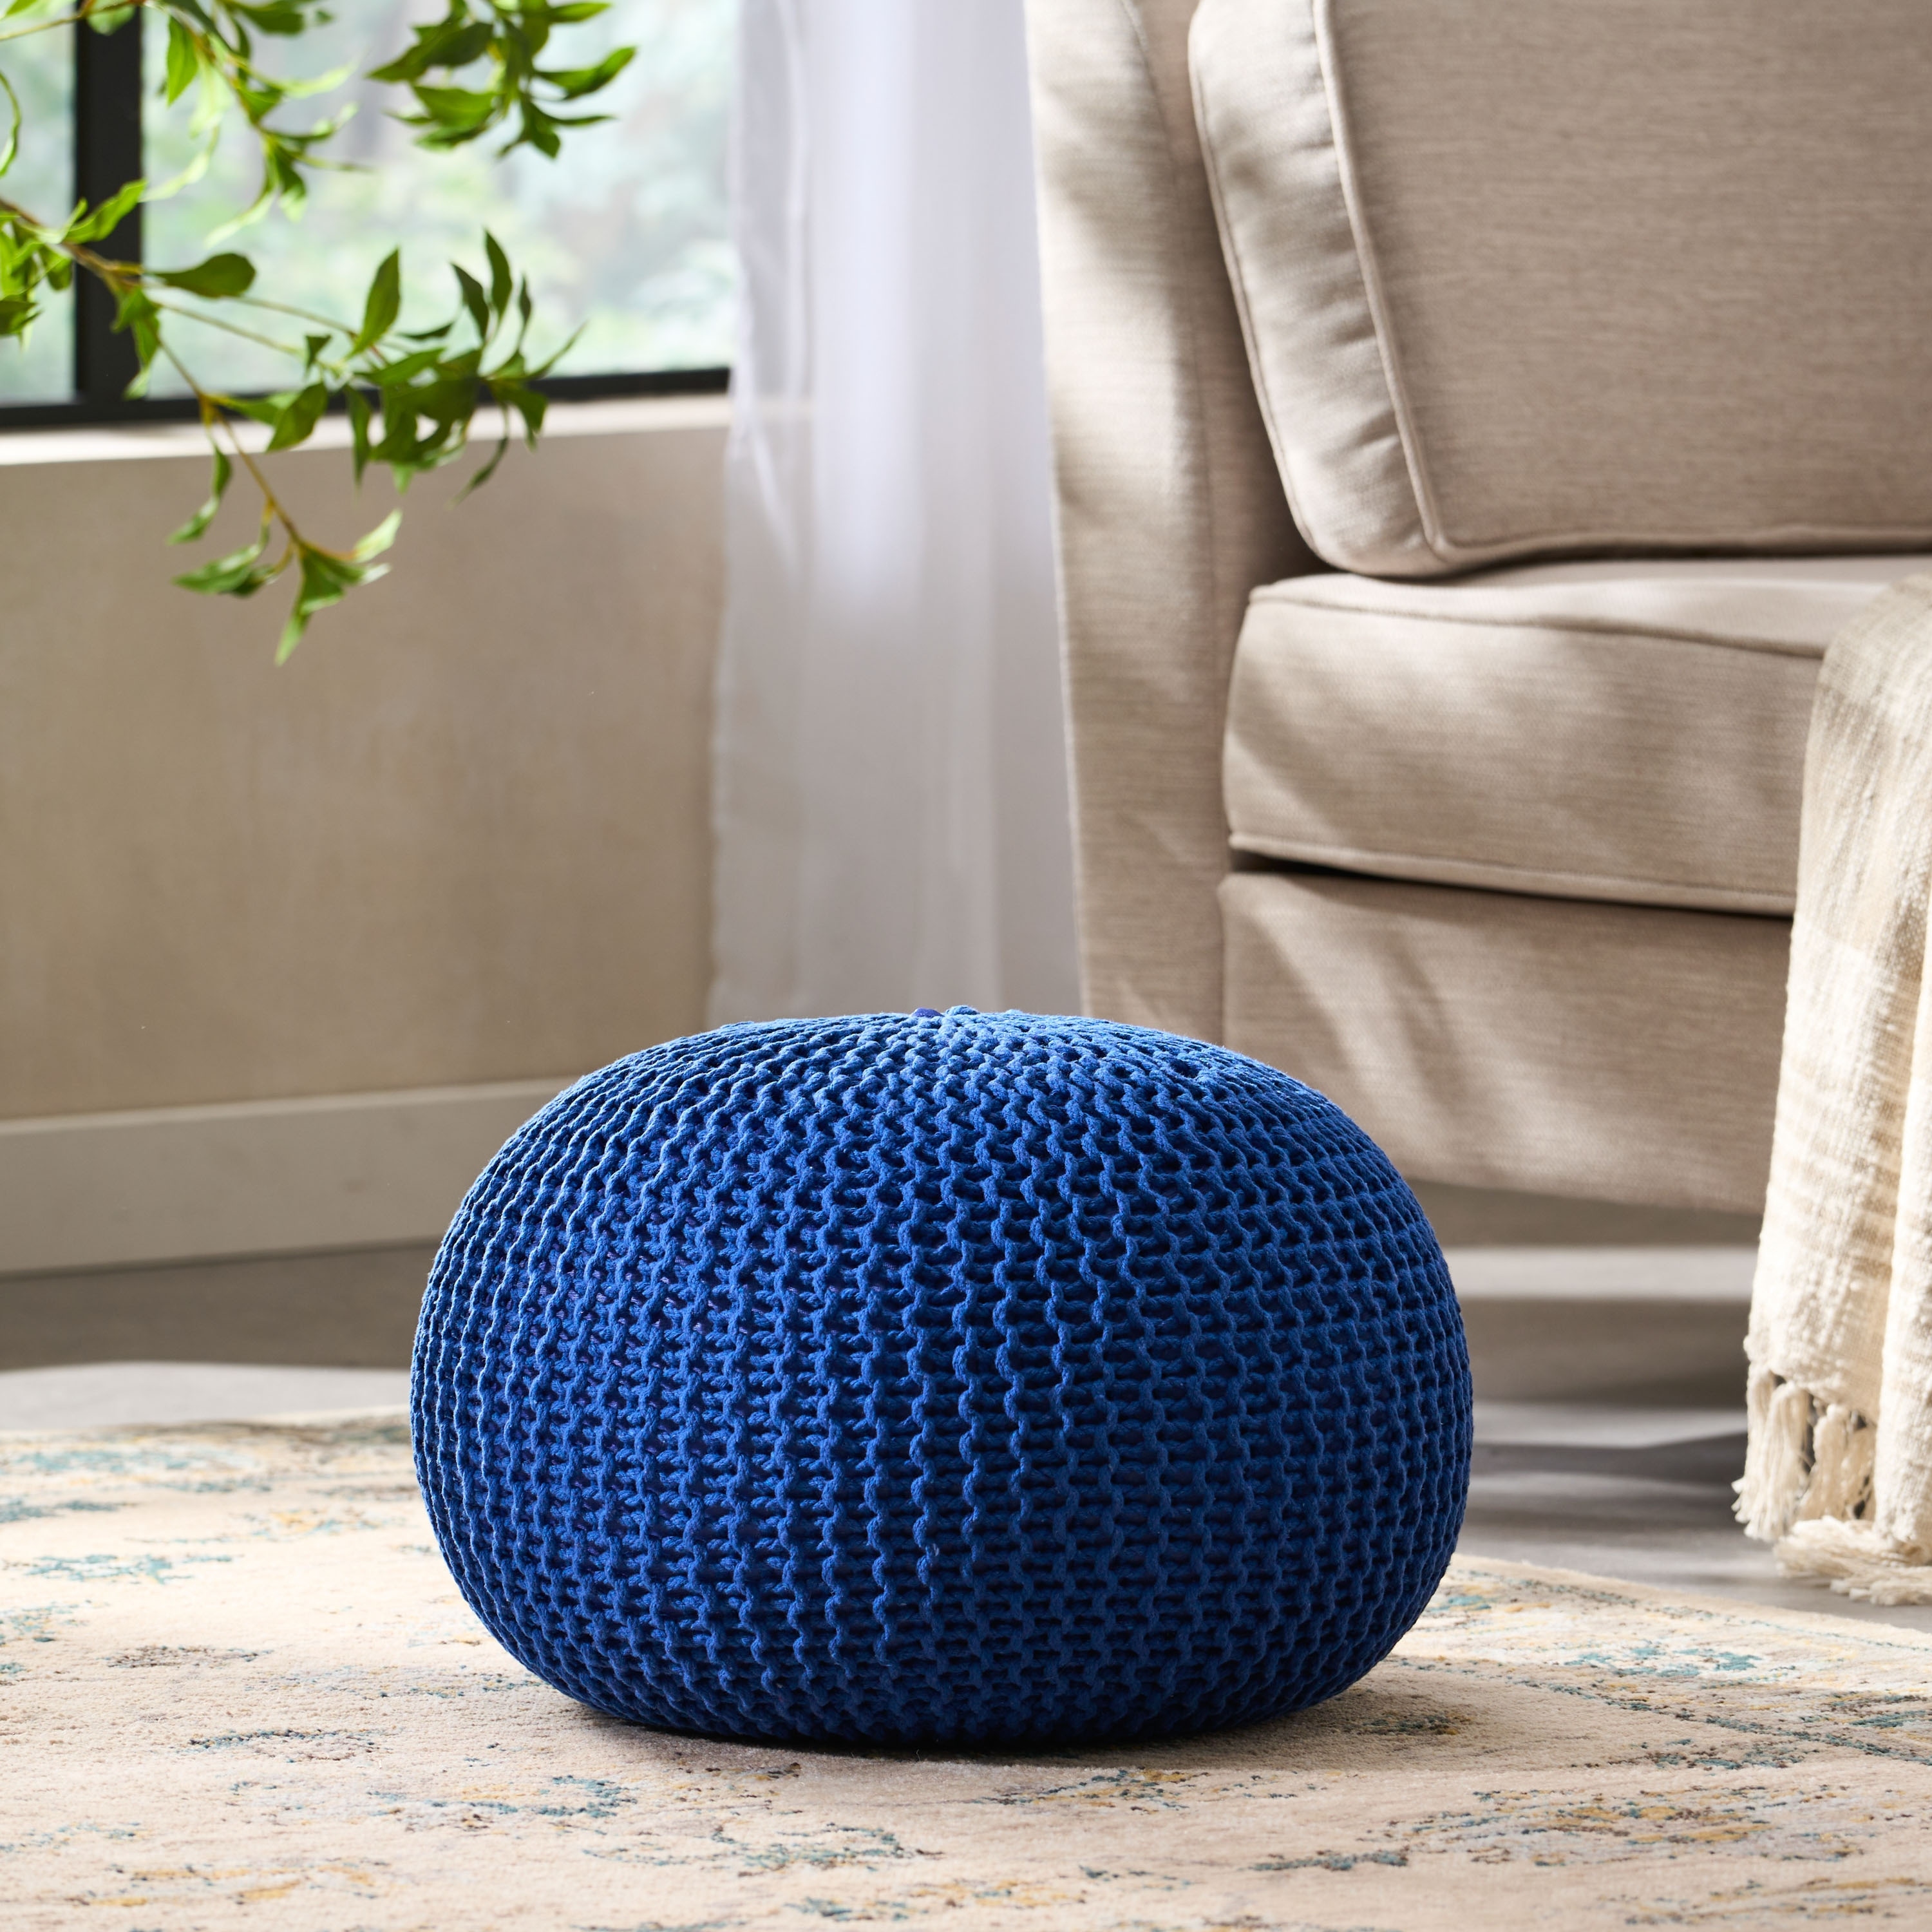 https://ak1.ostkcdn.com/images/products/is/images/direct/4a1cb3ccb73cfd2e2d67c339d3684cce2abef7b4/Abena-Knitted-Cotton-Pouf-by-Christopher-Knight-Home.jpg